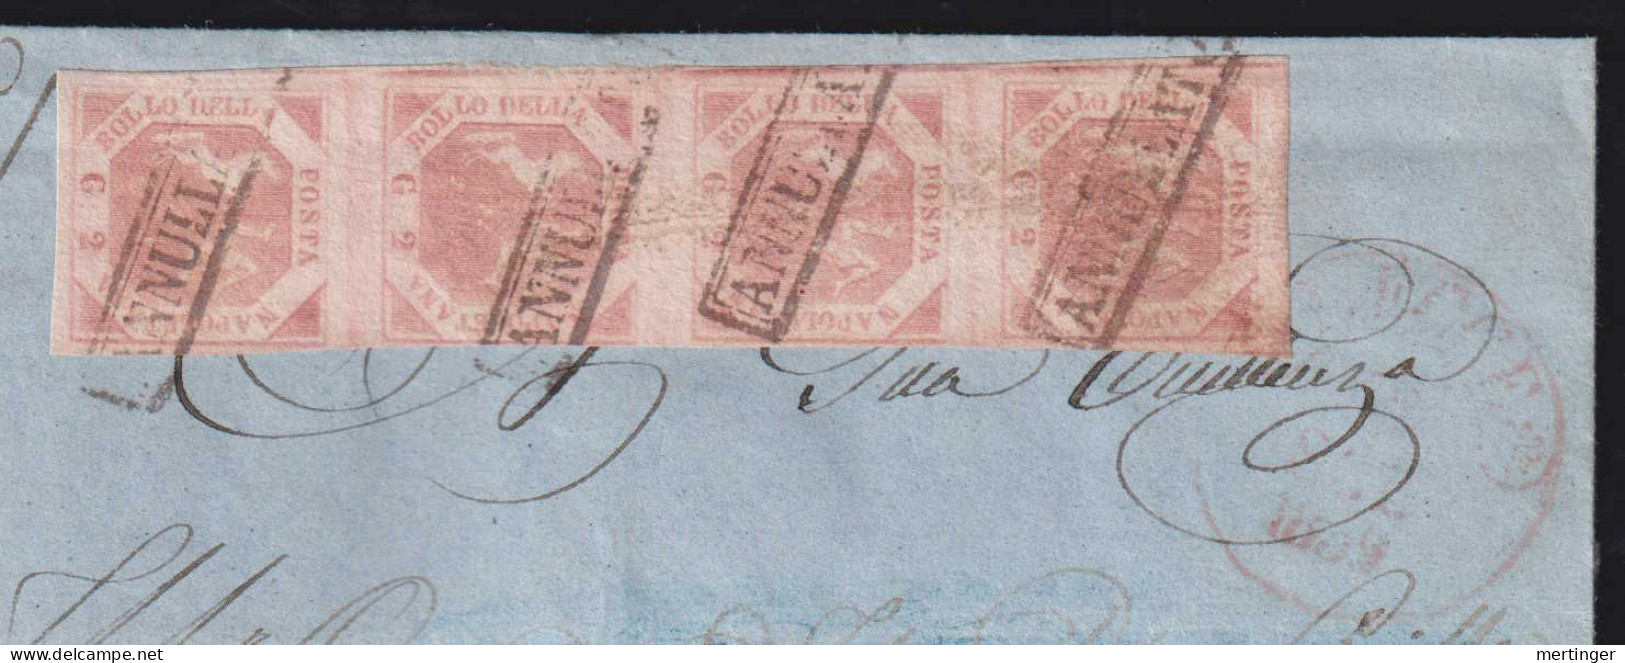 Italy Napoli 1859 Registered Cover Local Use 5x 2G + 20G - Napels